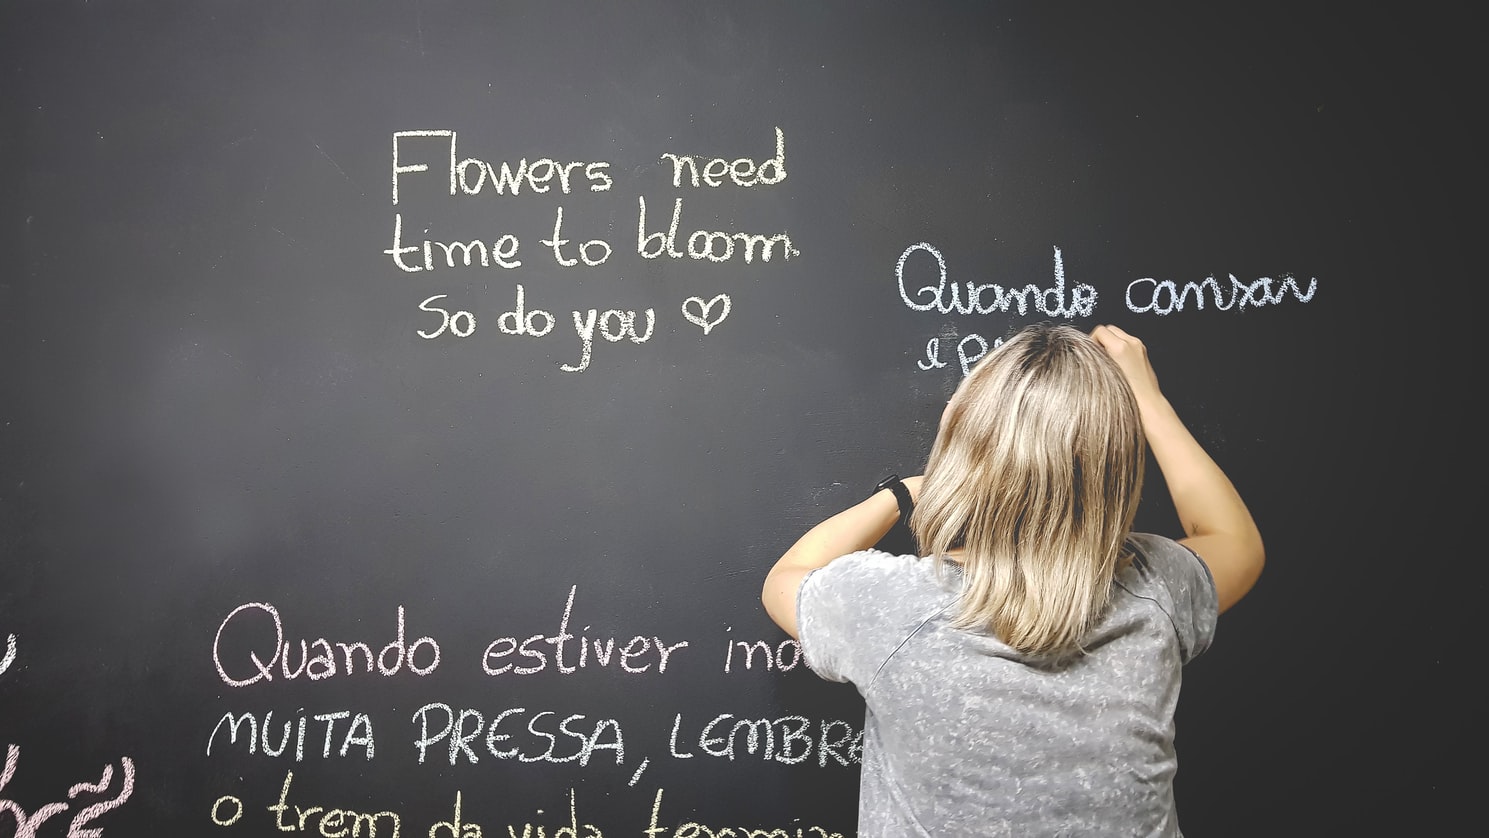 A blackboard with phrases written in different languages on it, and a child writing on it.